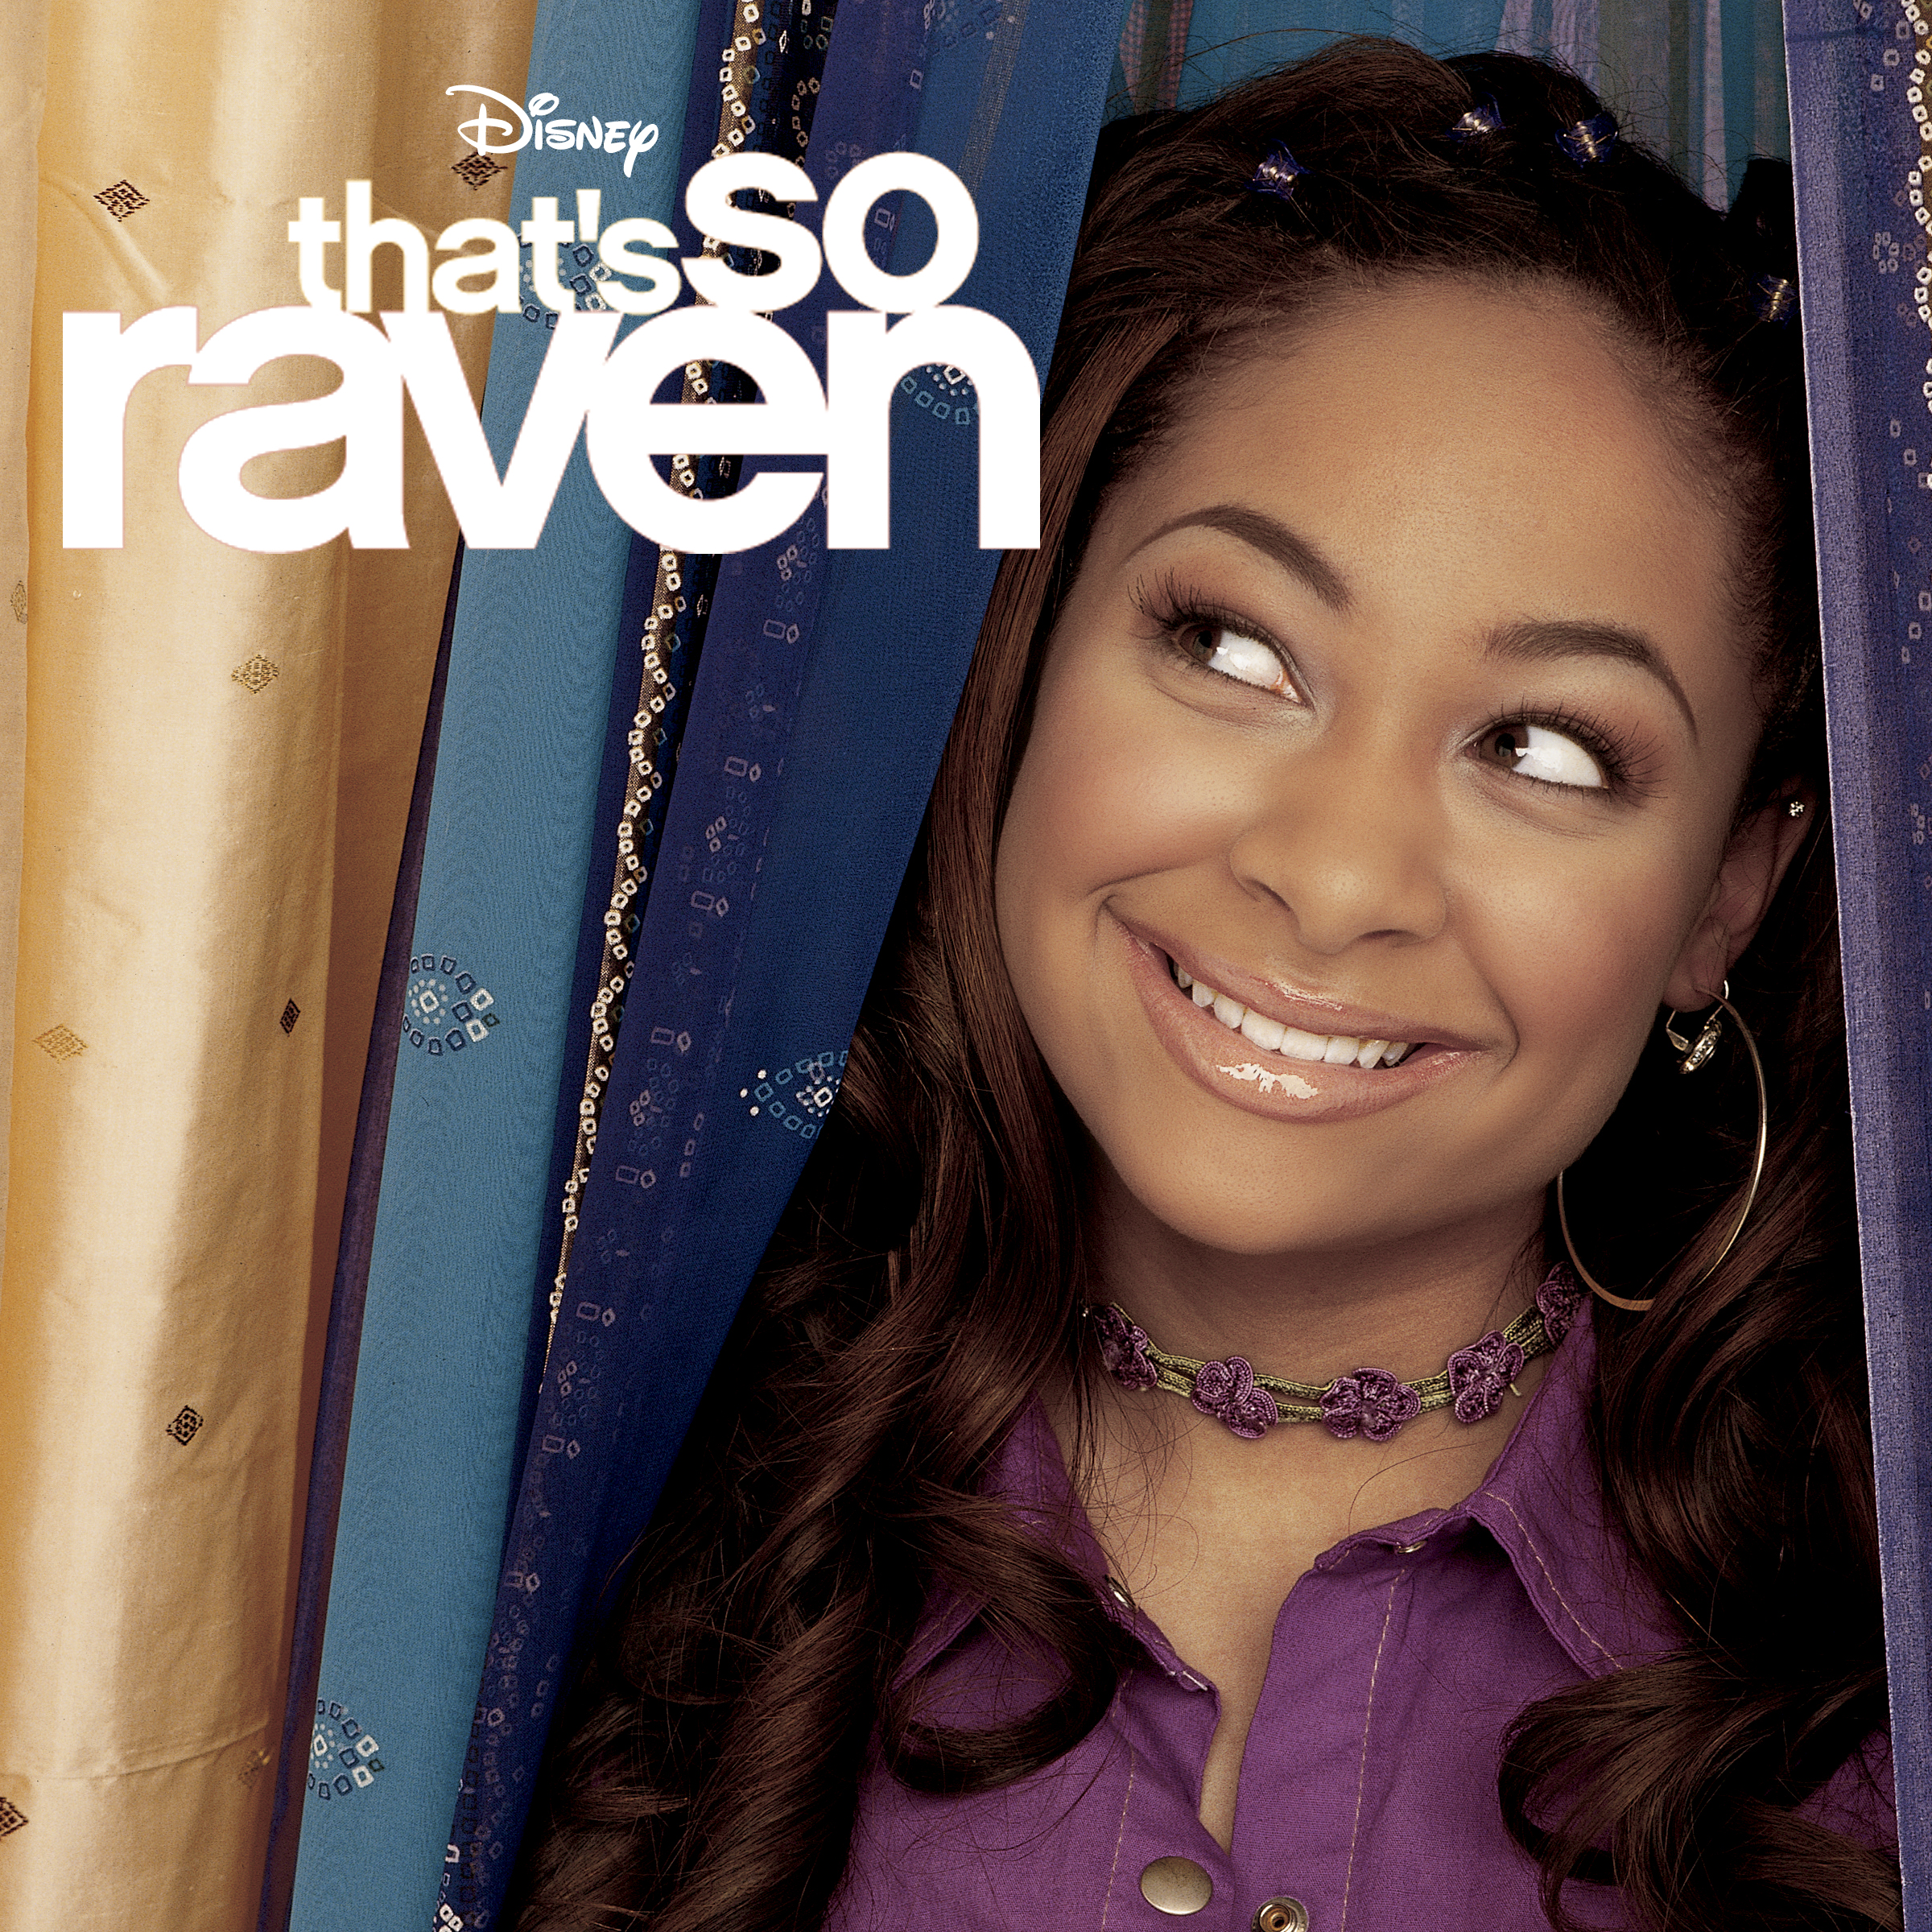 That's So Raven - Cast Photos (iTunes - Volumes 1 to 9) .